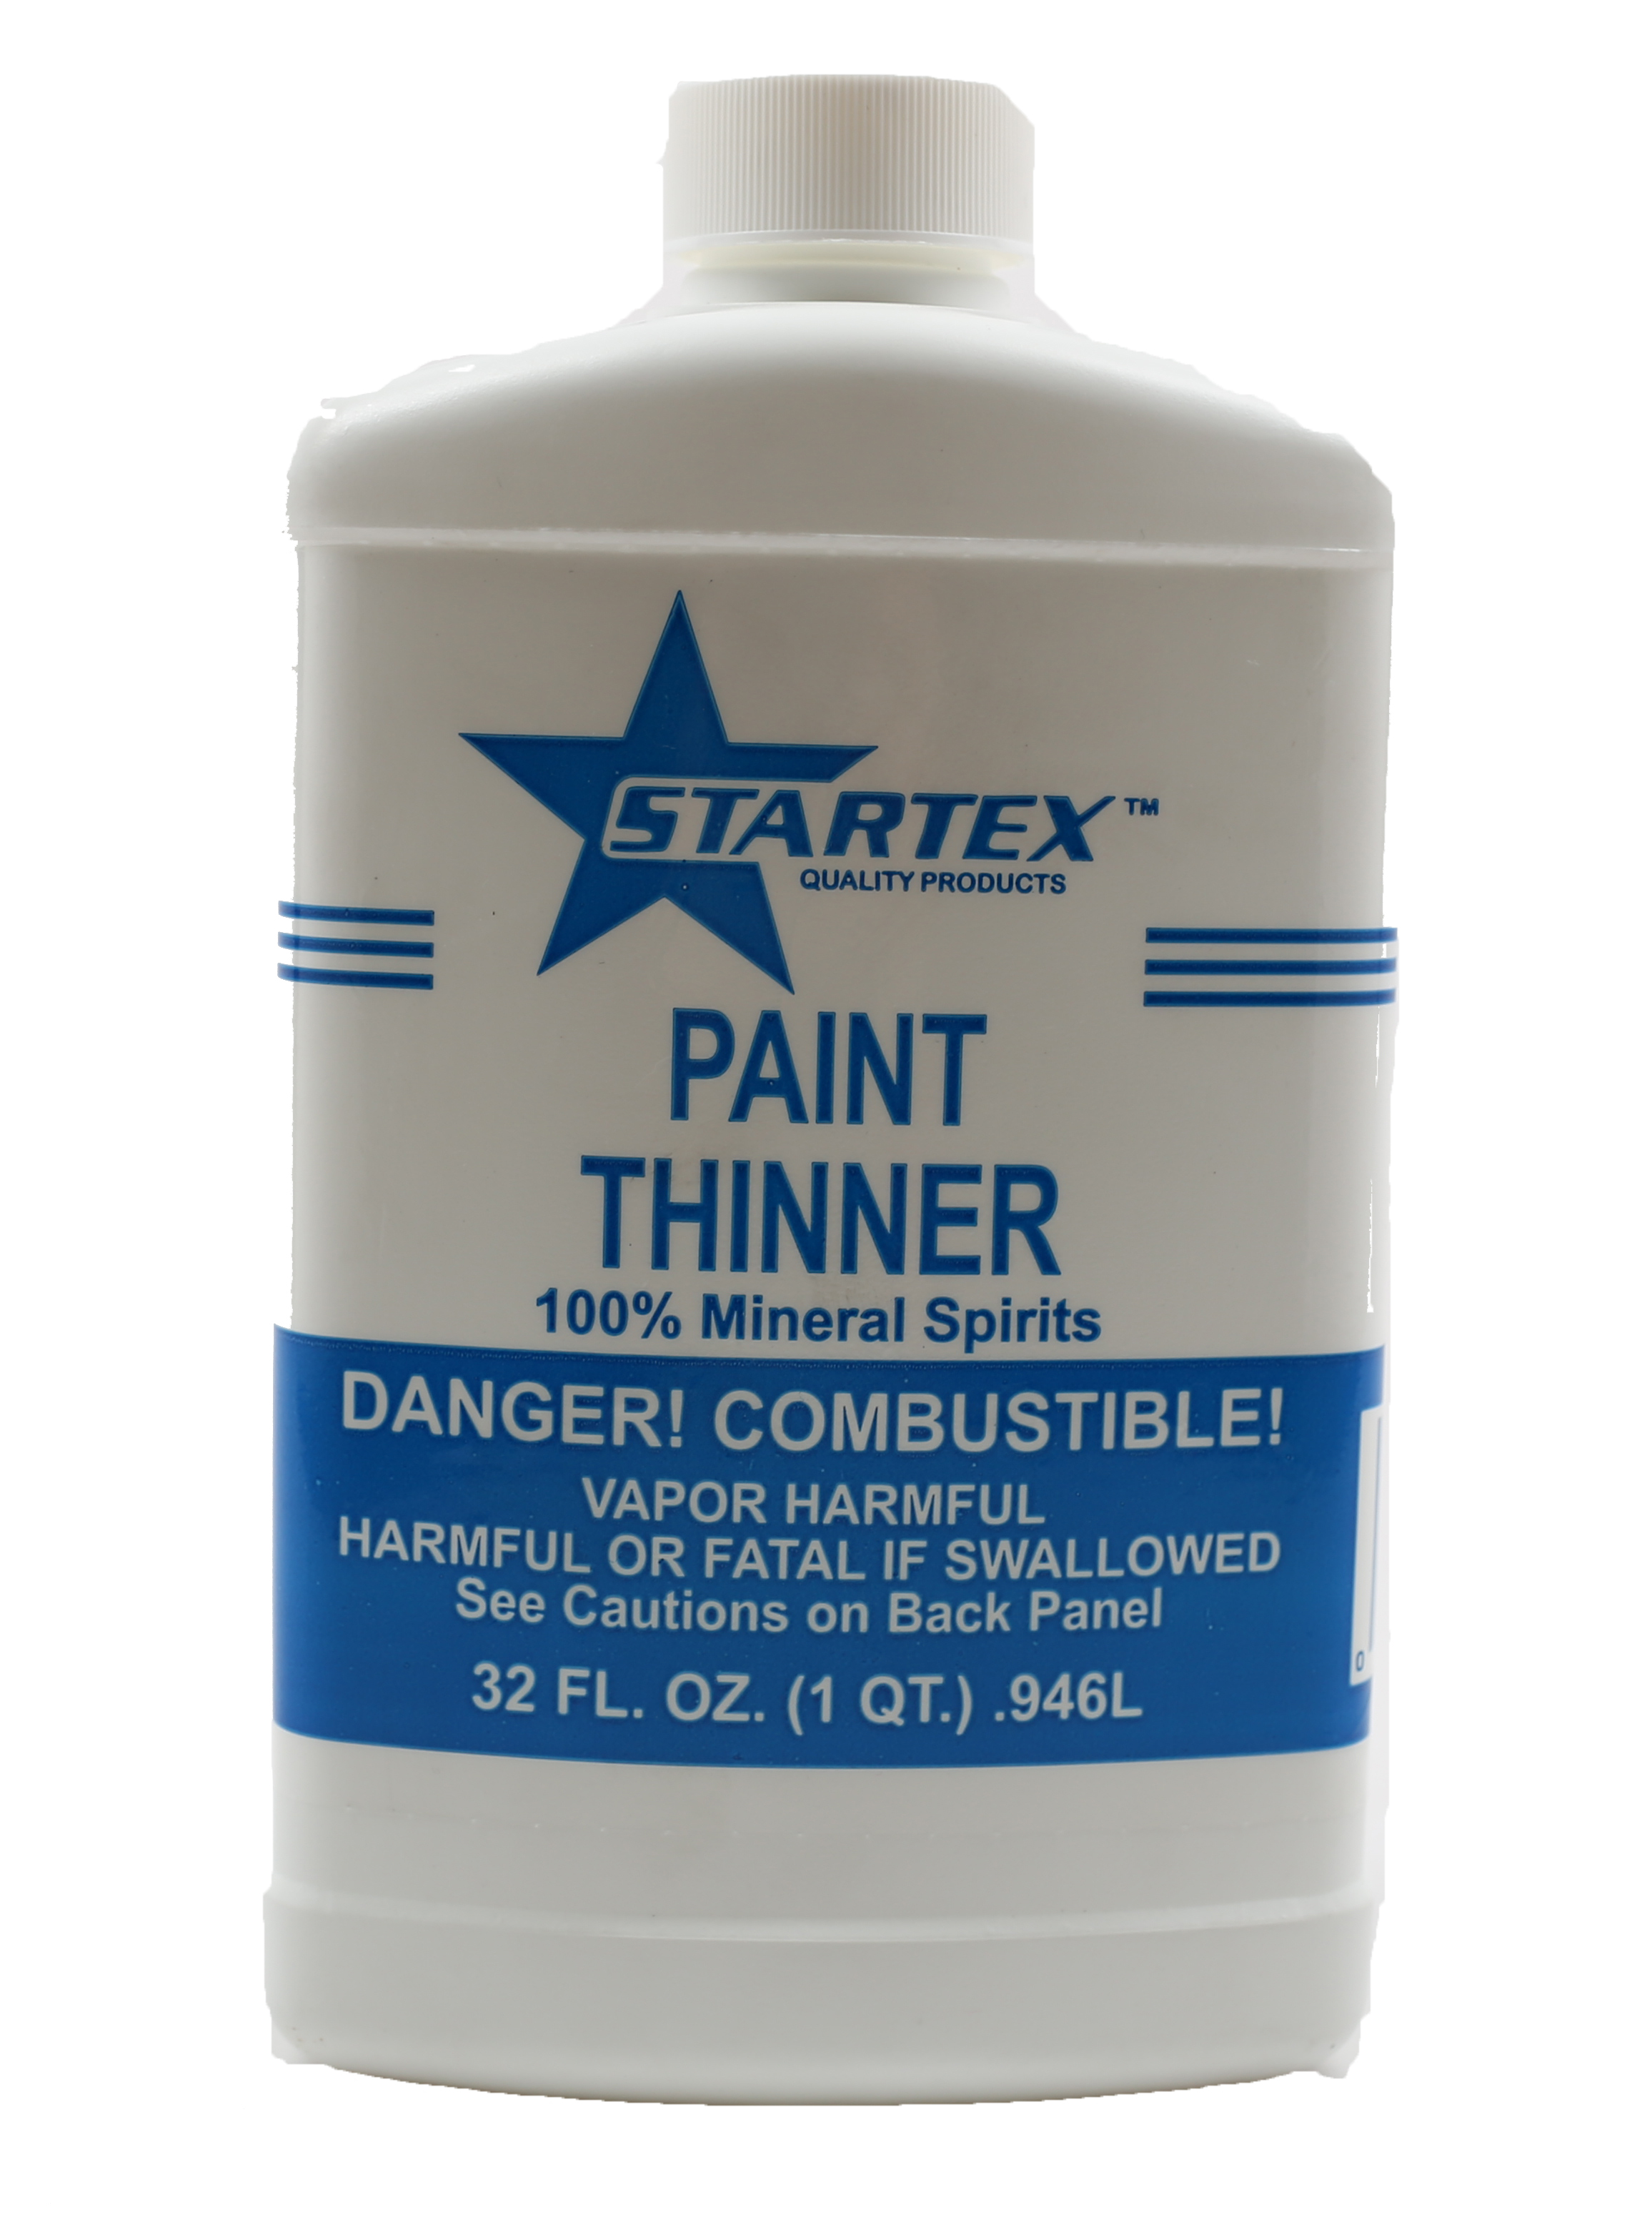 Paint Thinner - Mineral Spirits